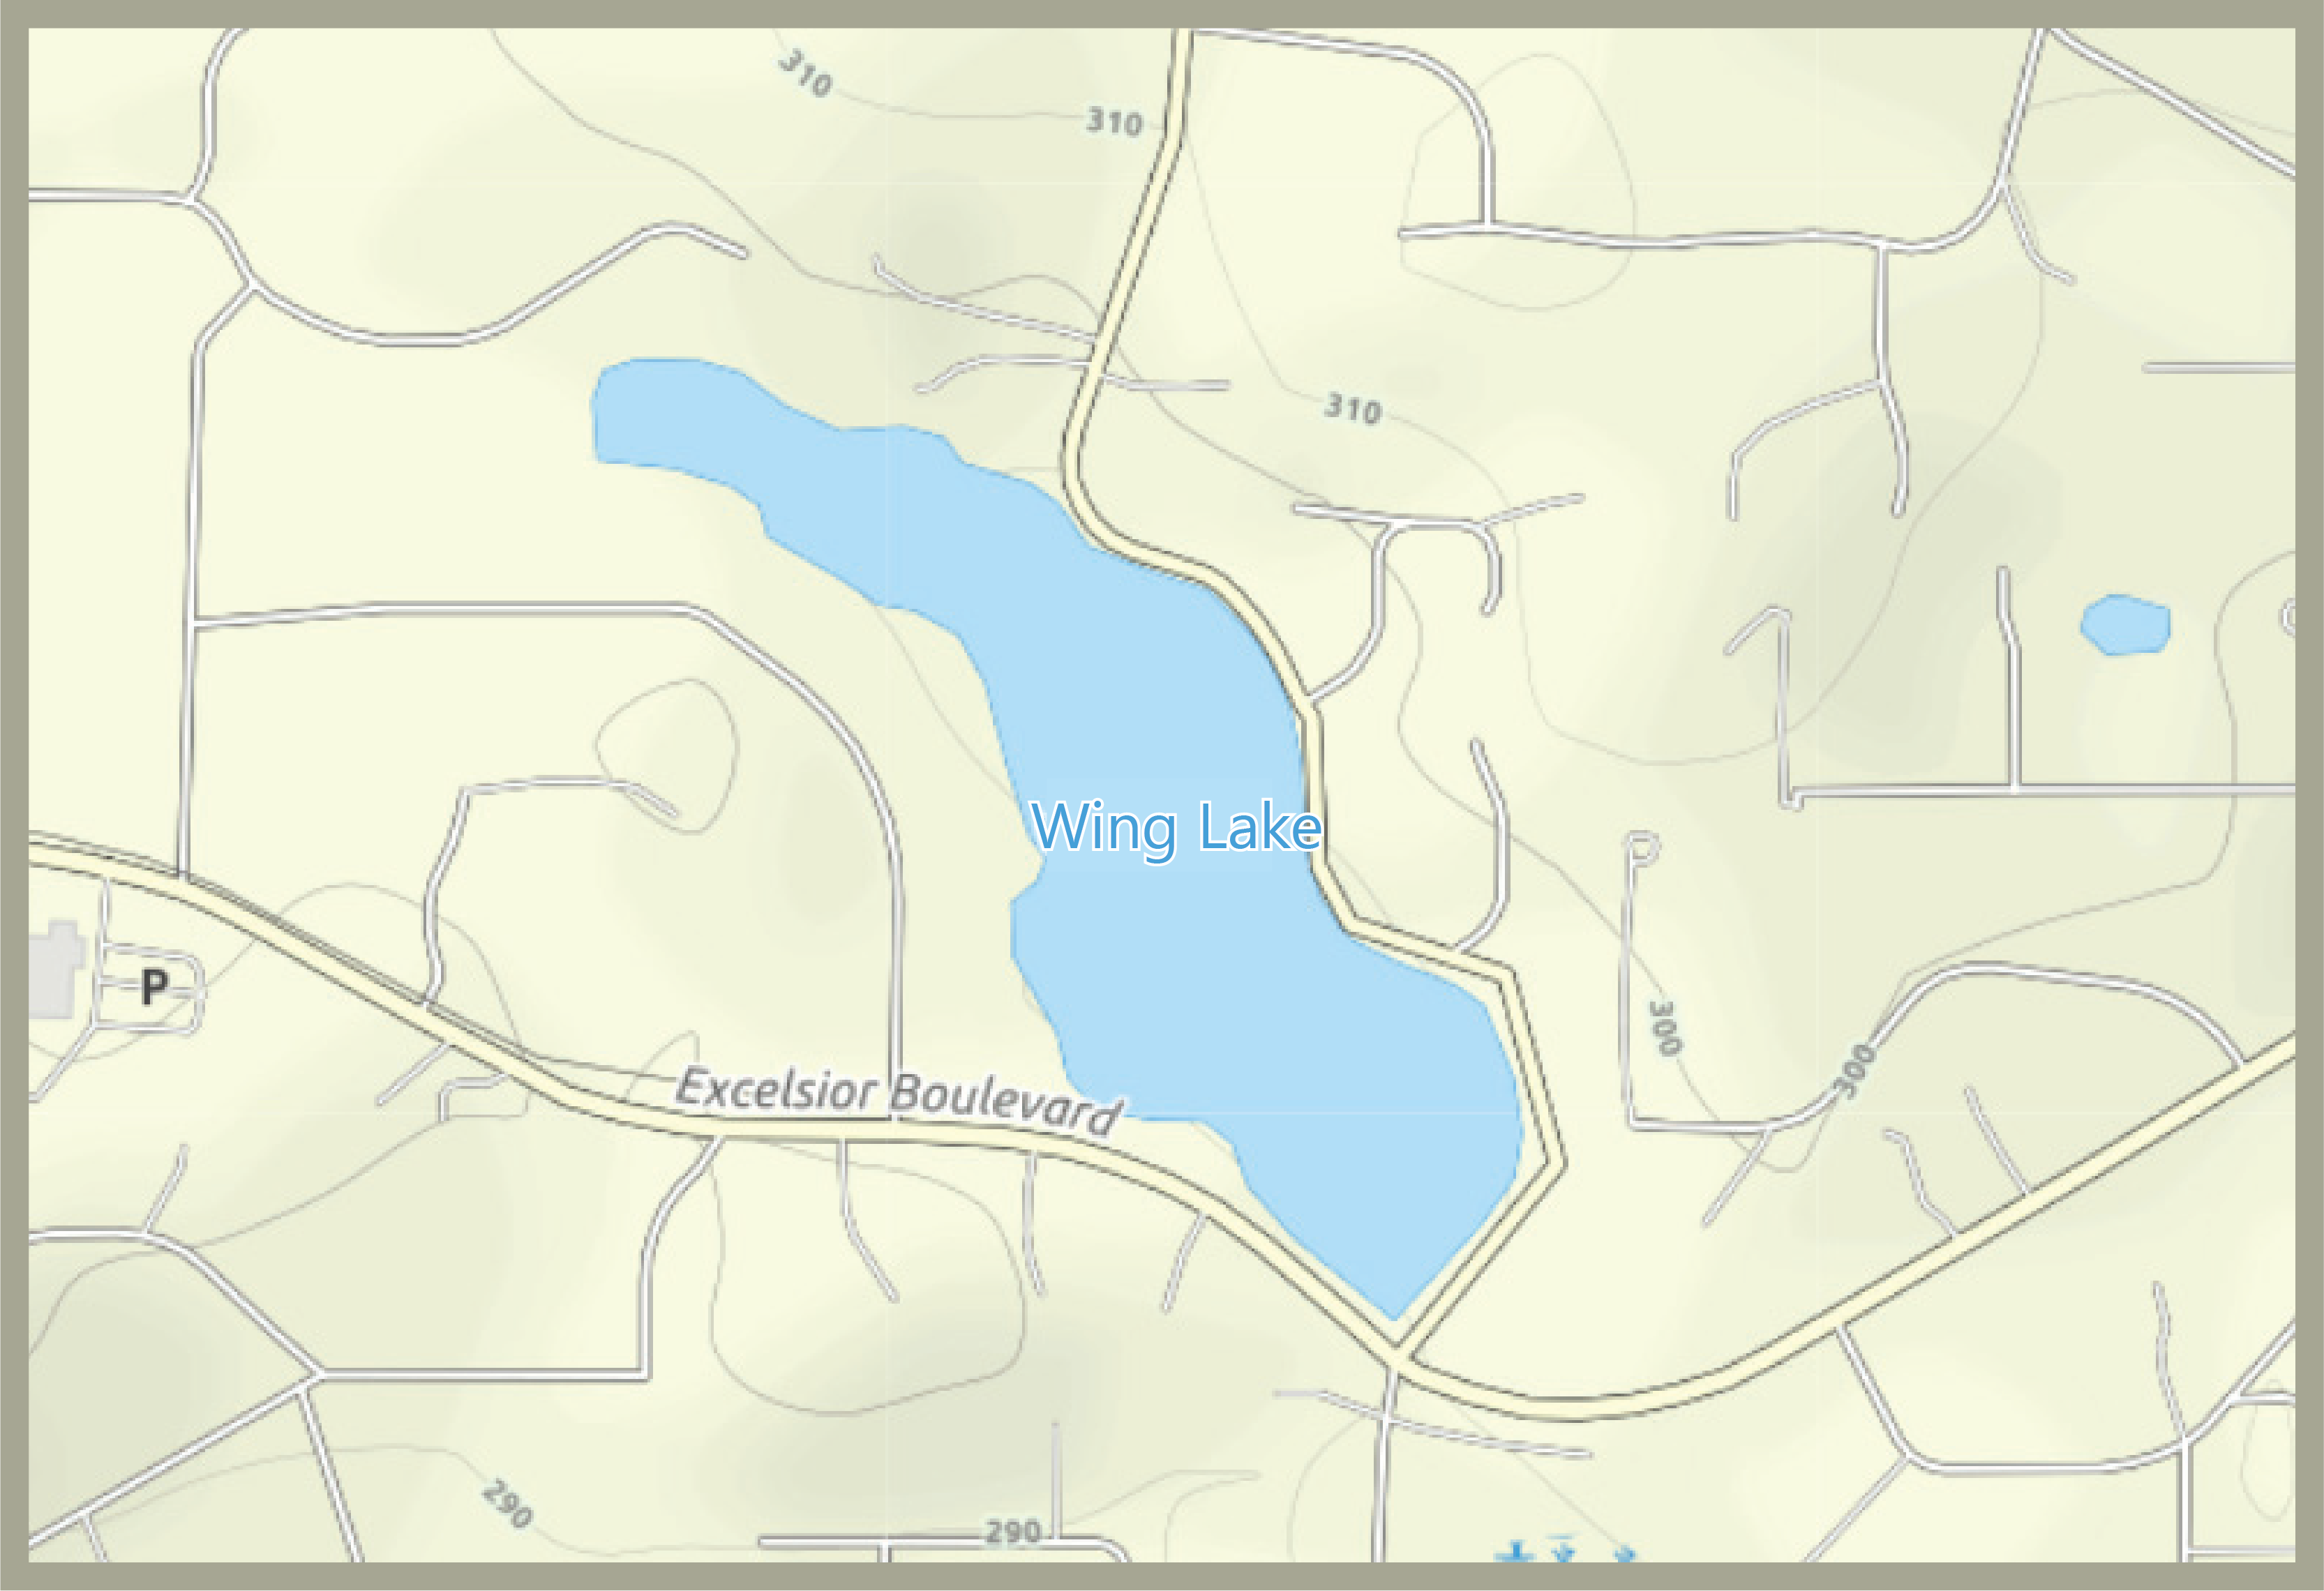 Street map of Wing Lake Area